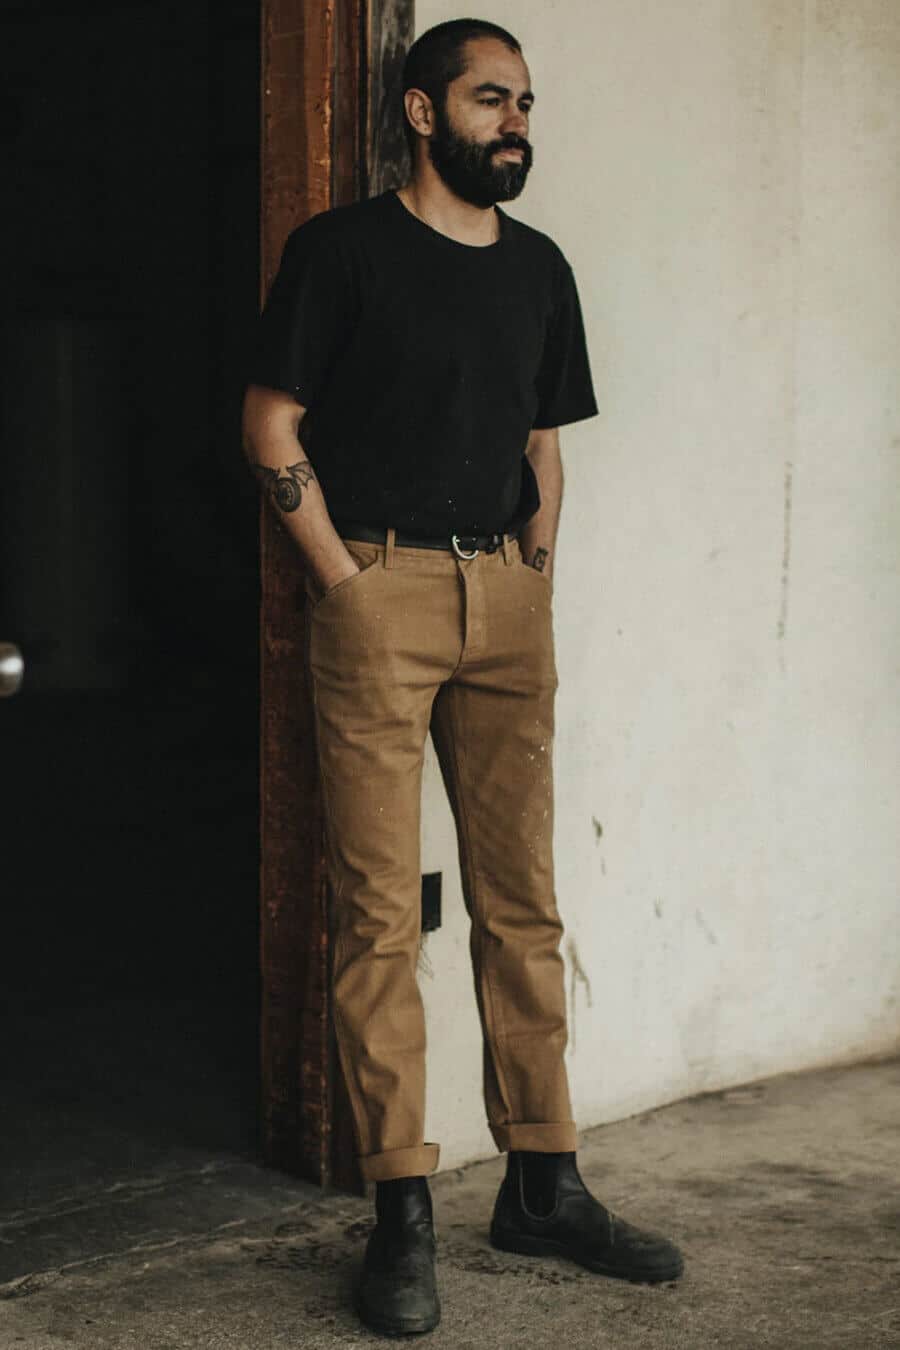 Men's simple khaki pants outfit with a black t-shirt and boots